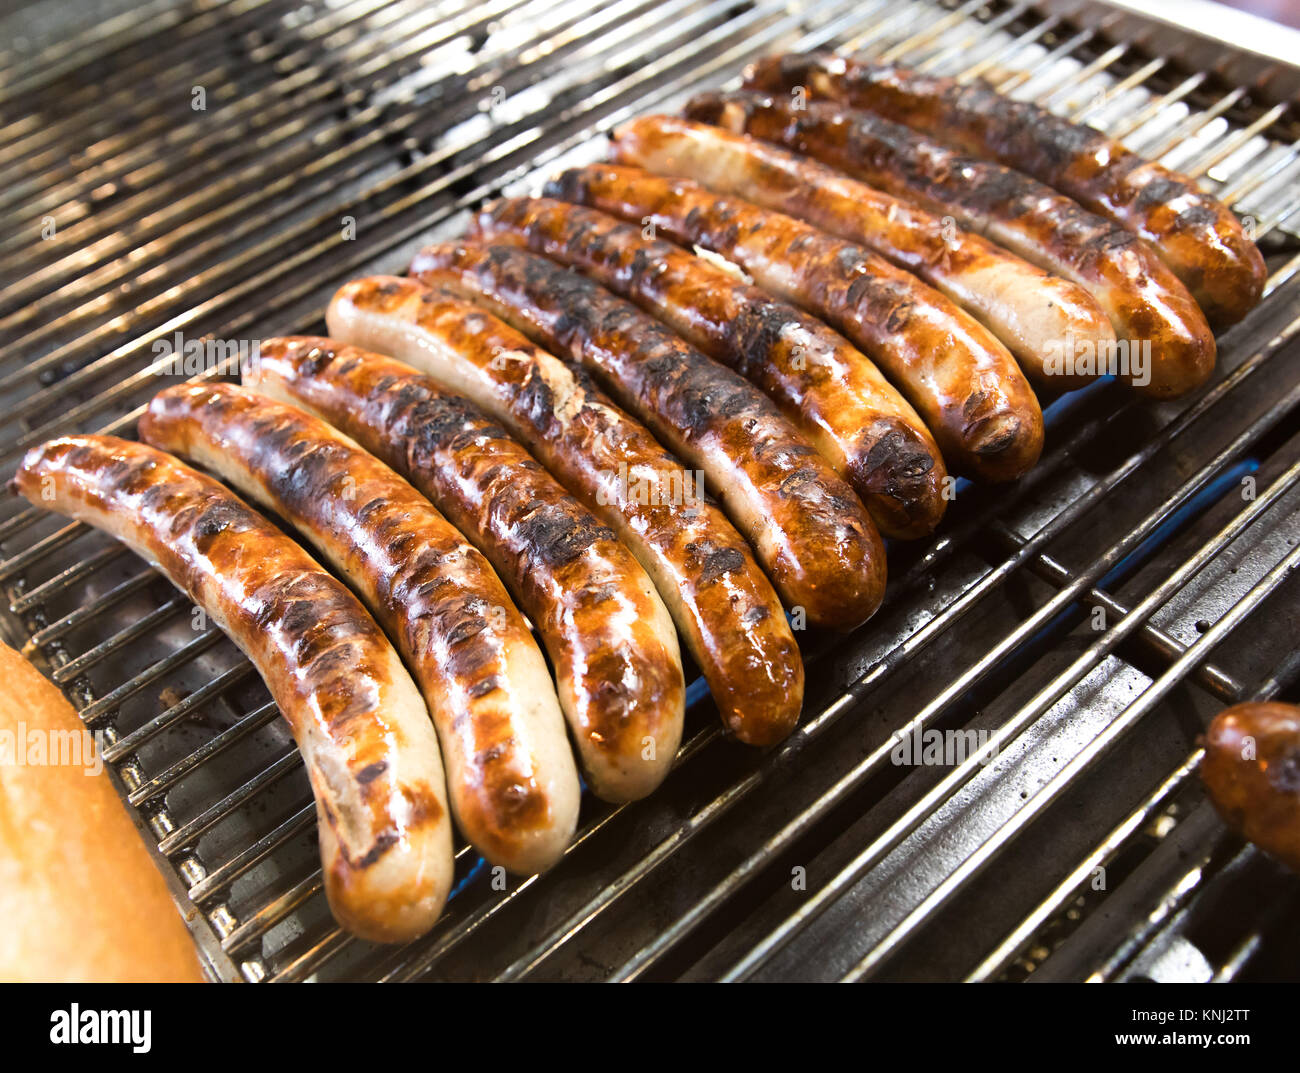 Bratwurst sausages being grilled on an outdoor BBQ grill Stock Photo - Alamy